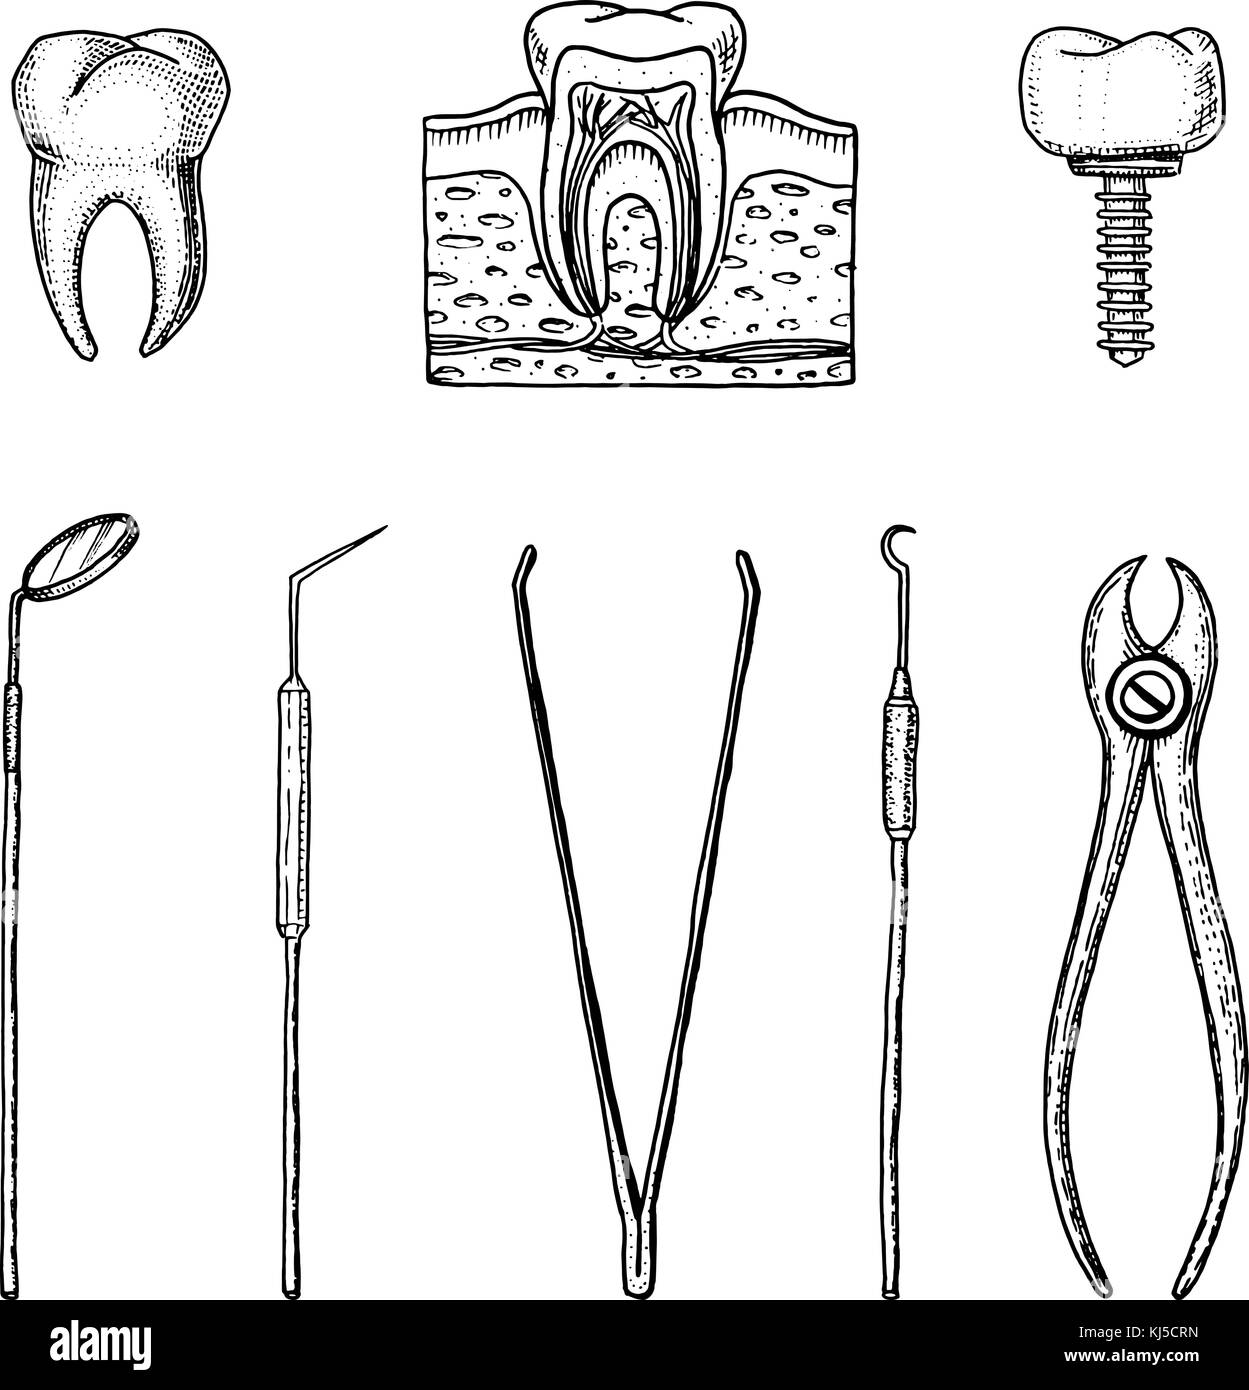 Vintage Dentist Tools Medical Equipment In Retro Style Stock Illustration -  Download Image Now - iStock